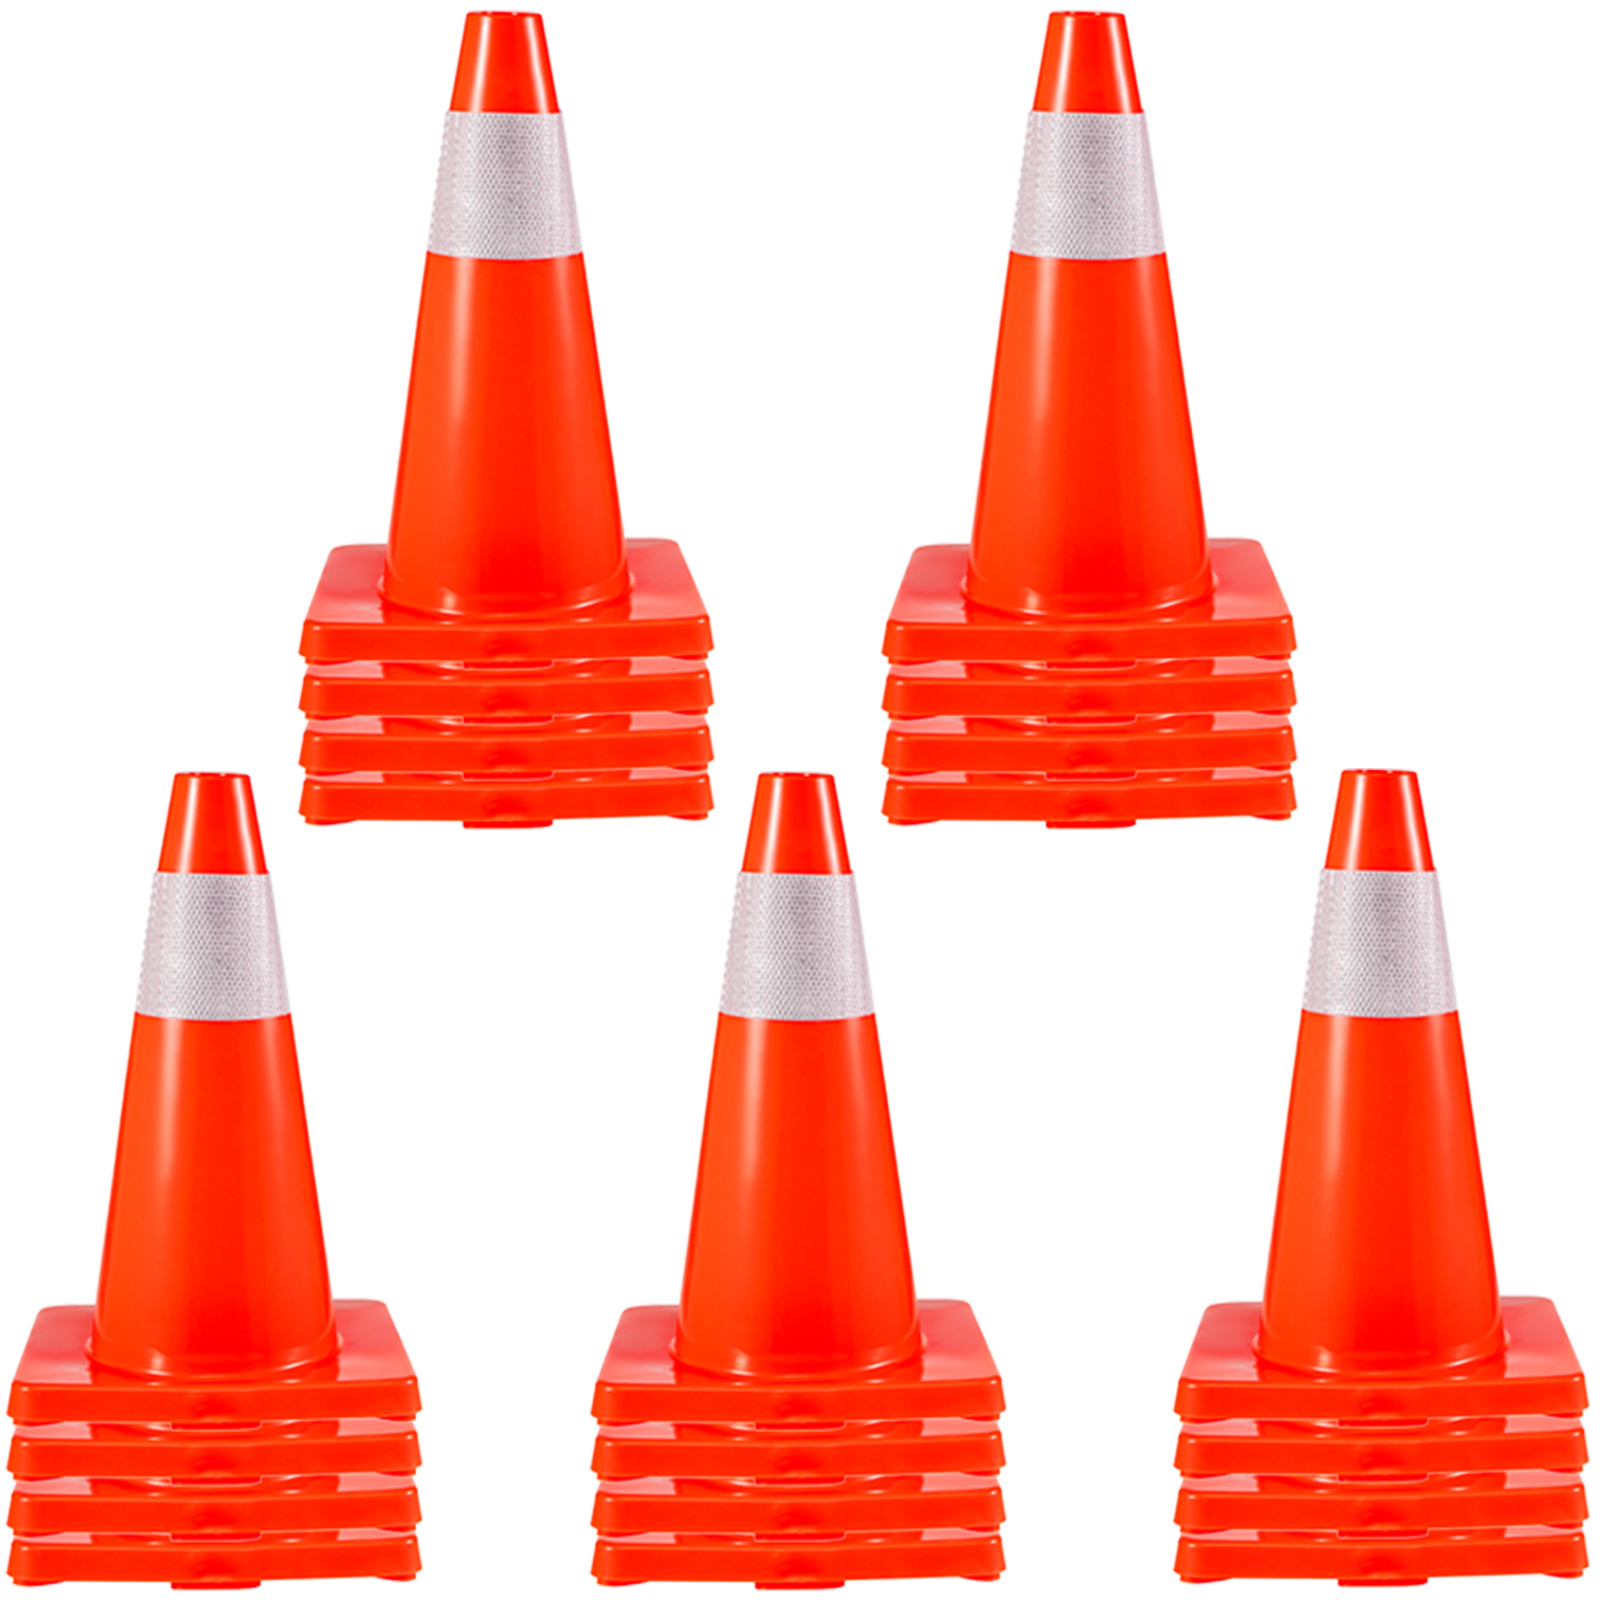 Traffic Safety Cones 20 PCS PVC Parking Cones 18" W/ 1 Reflective Collars 11" X 11" Red PVC Base For Higher Warning Roads Construction Sites от Vevor Many GEOs